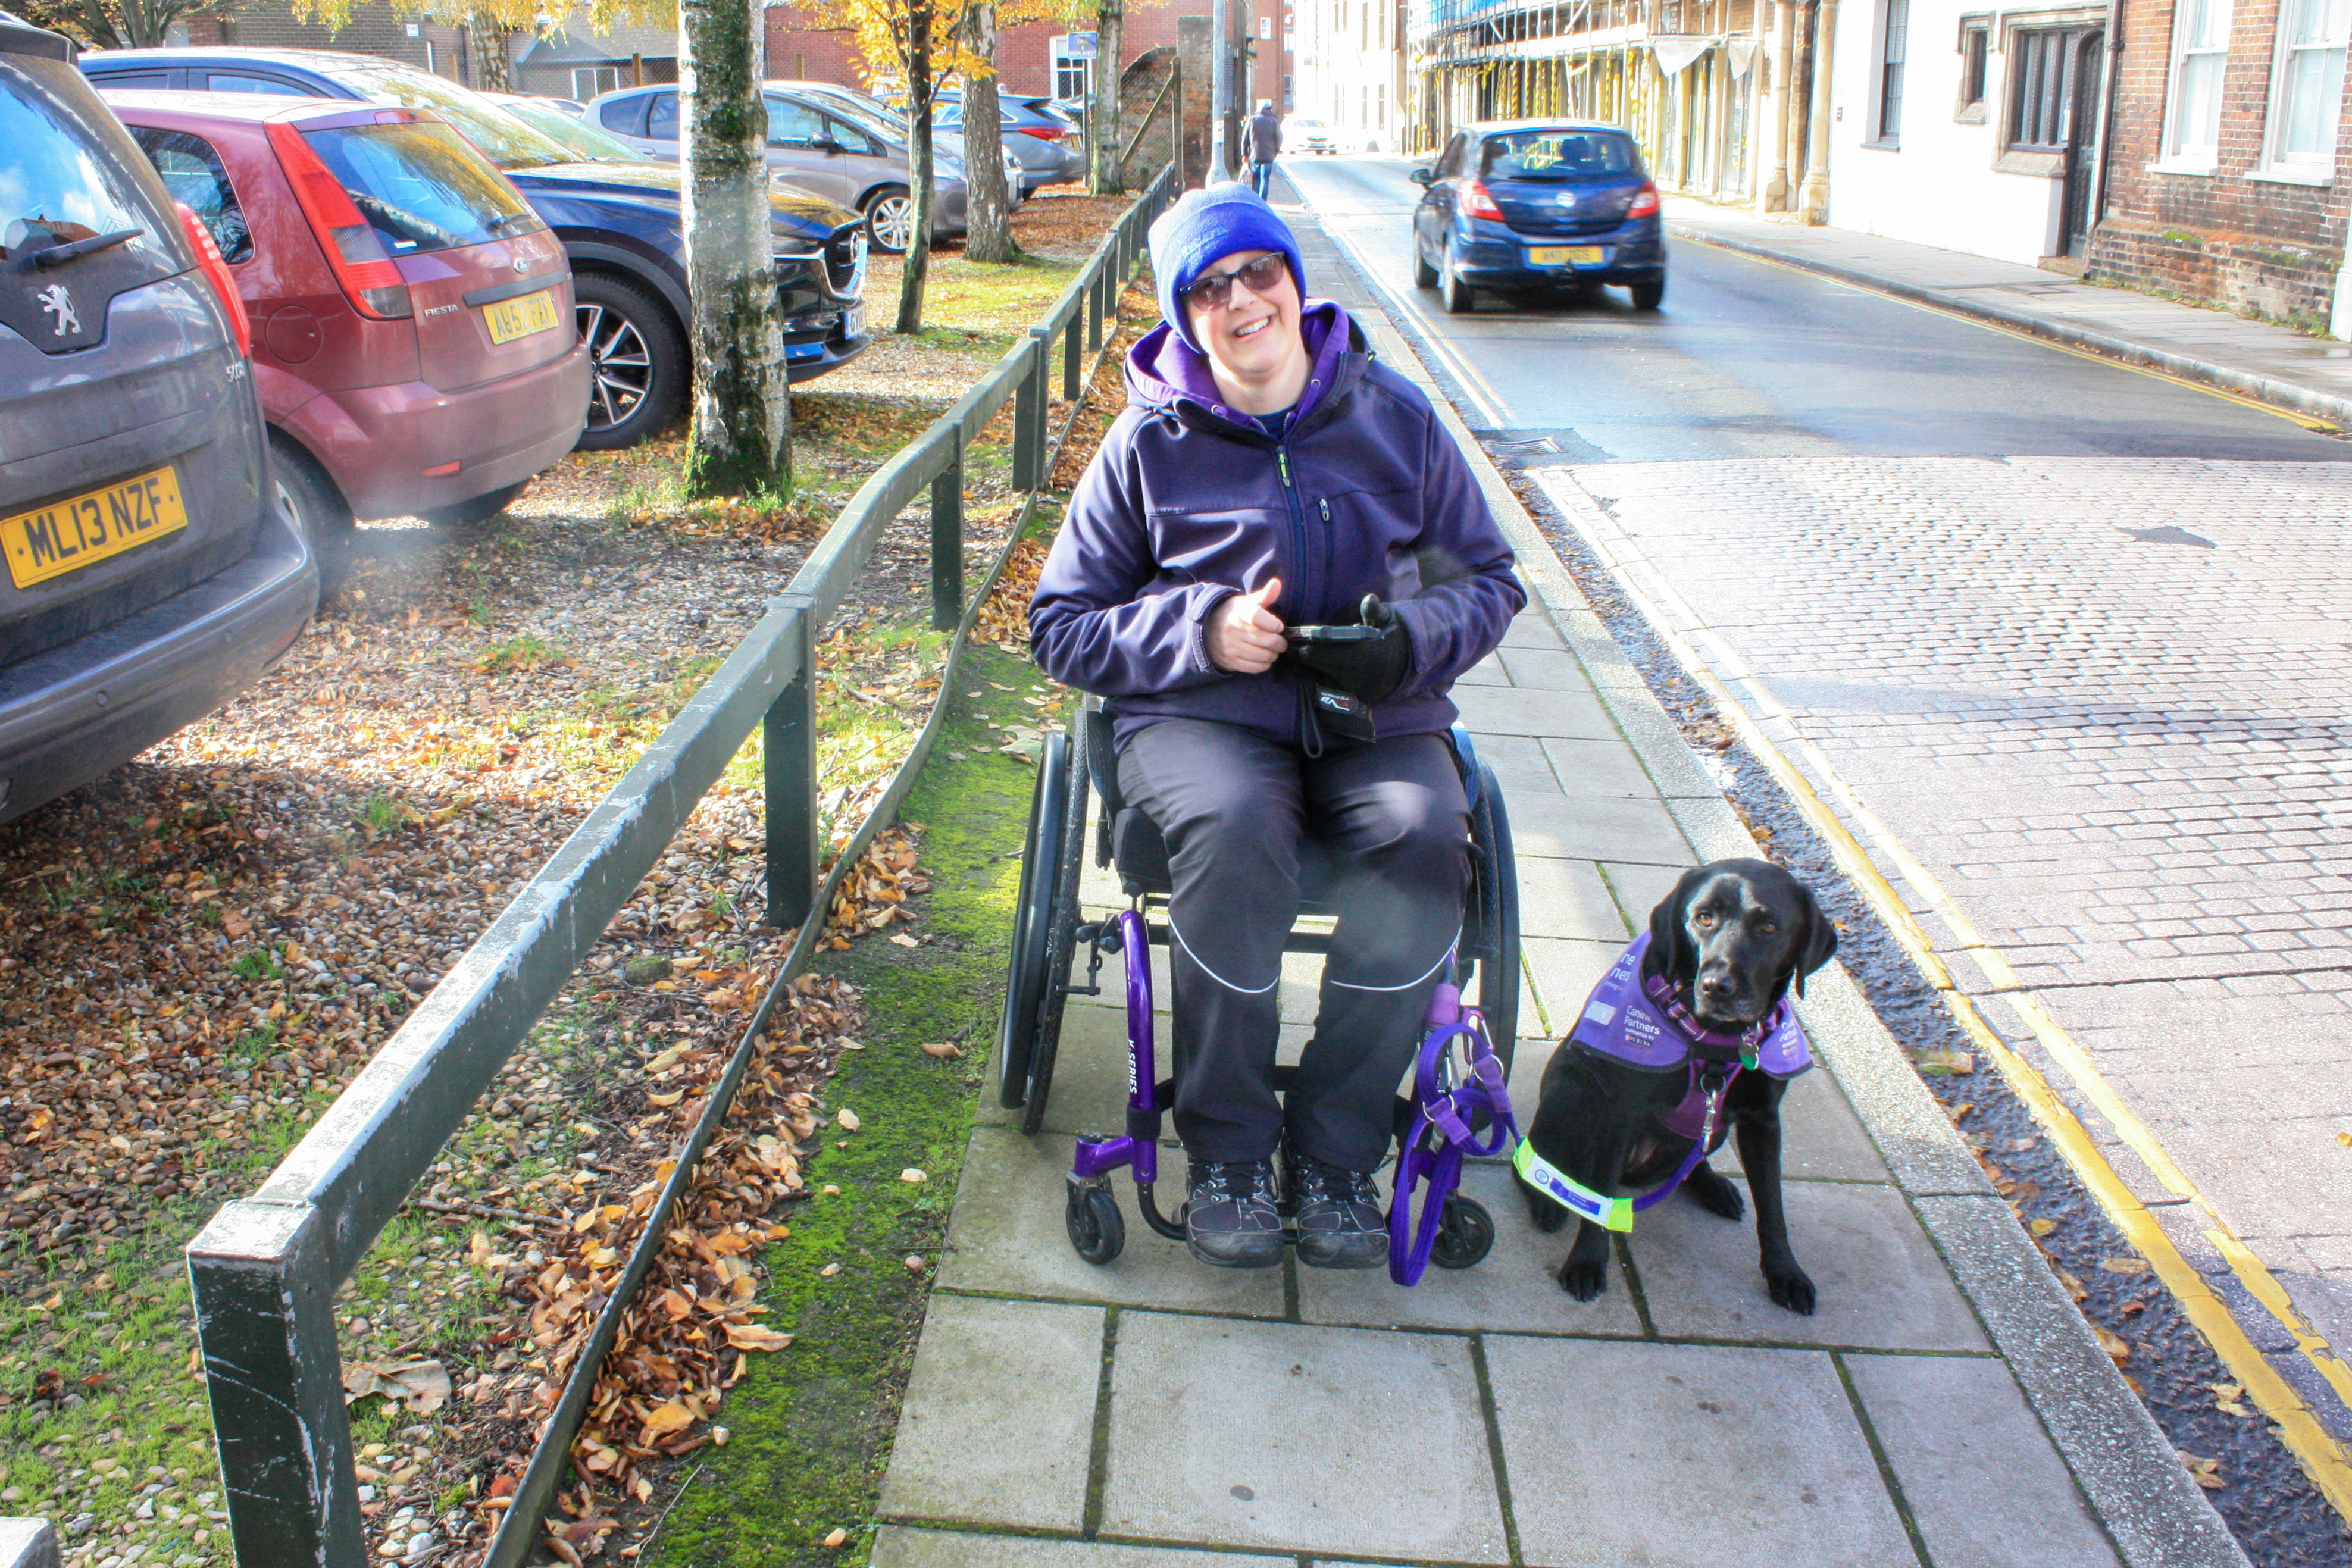 Nicki in a manual wheelchair with Canine Partner Liggy sitting next to her. They are on a normal town pavement.